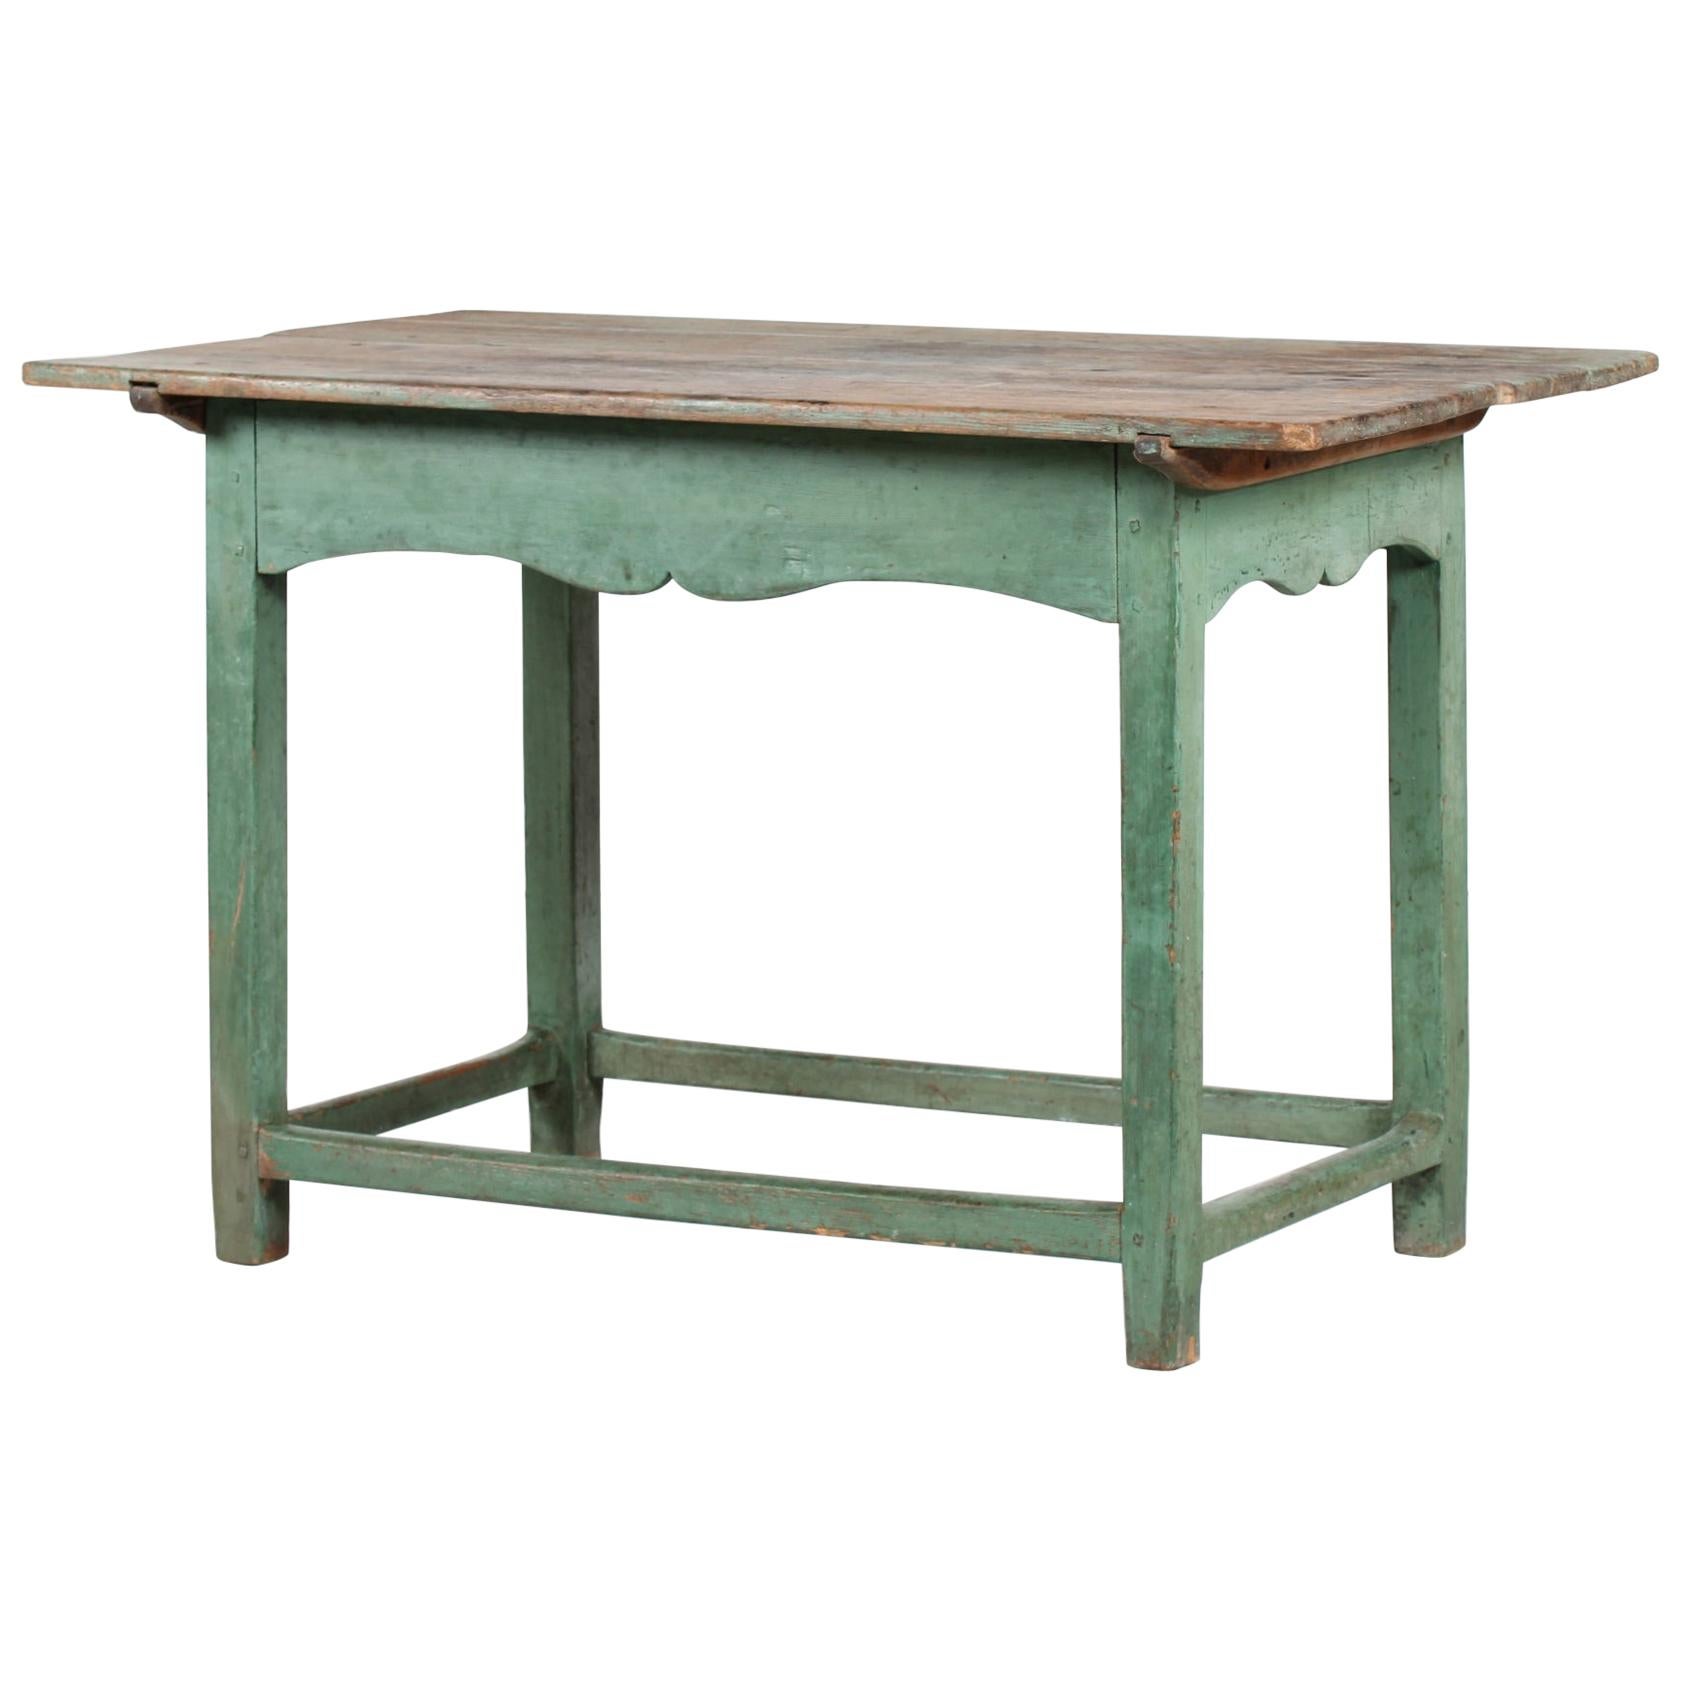 Scandinavian Antique Table of Pine Wood with Green Patinated Frame, 19th Century For Sale